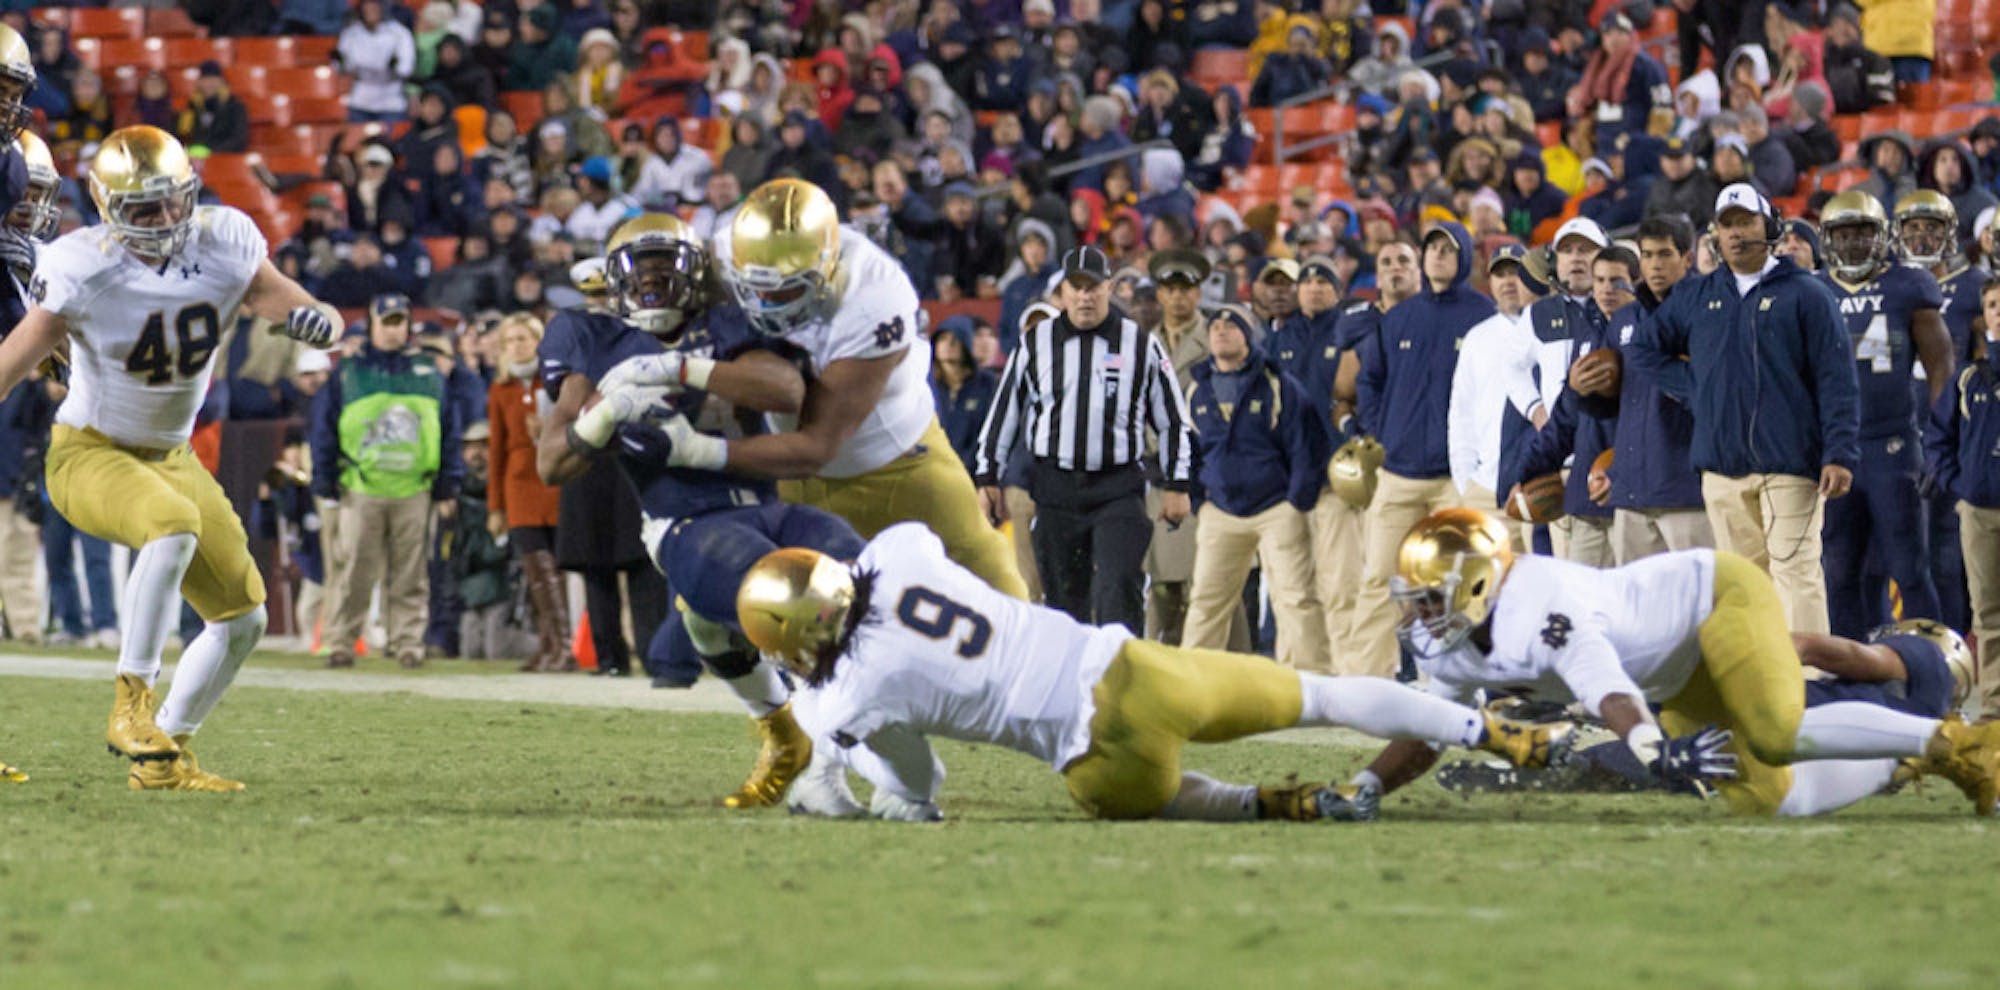 Irish sophomore defensive end Isaac Rochell and sophomore linebacker Jaylon Smith gang up to bring down a Navy ballcarrier during Notre Dame’s 49-39 win Saturday.